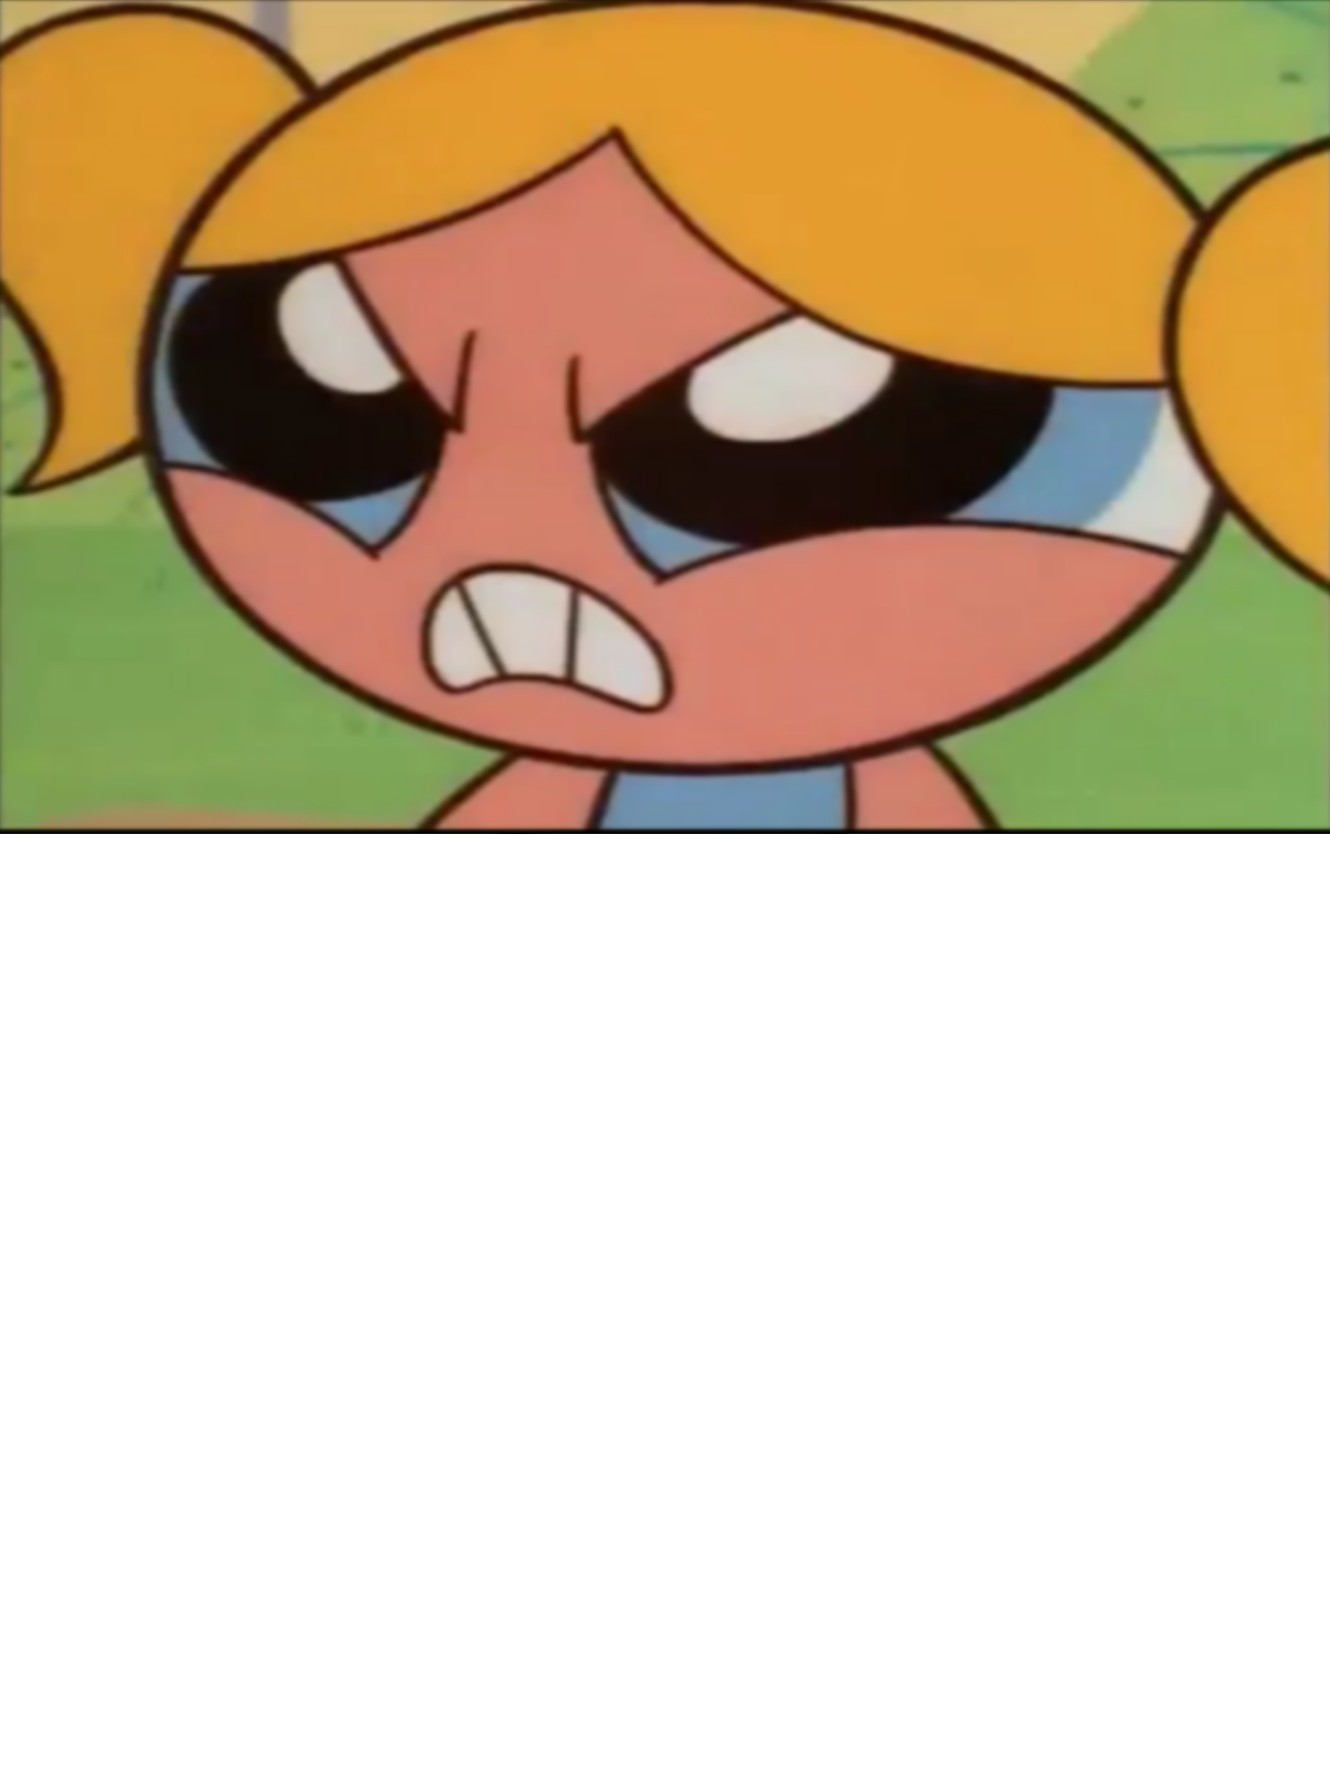 High Quality Bubbles hates template Blank Meme Template